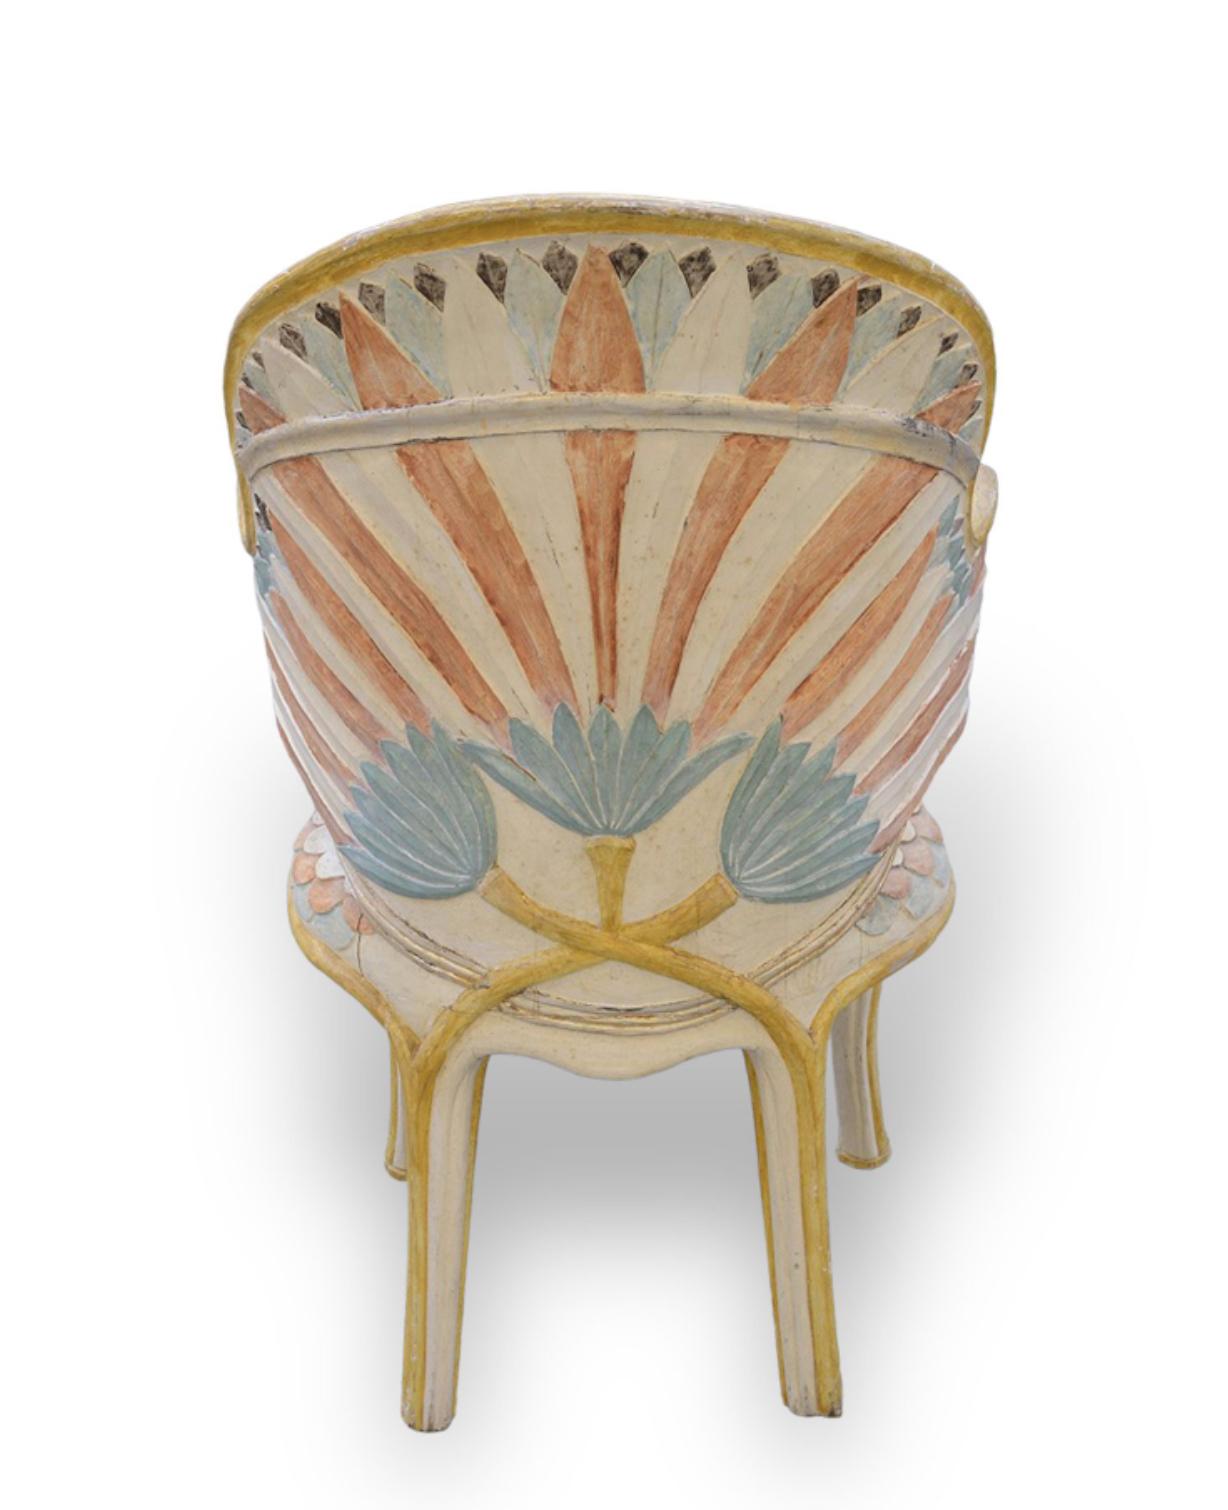 Wood 20th Century Italian Hand Carved and Hand Painted Colourful Chair For Sale